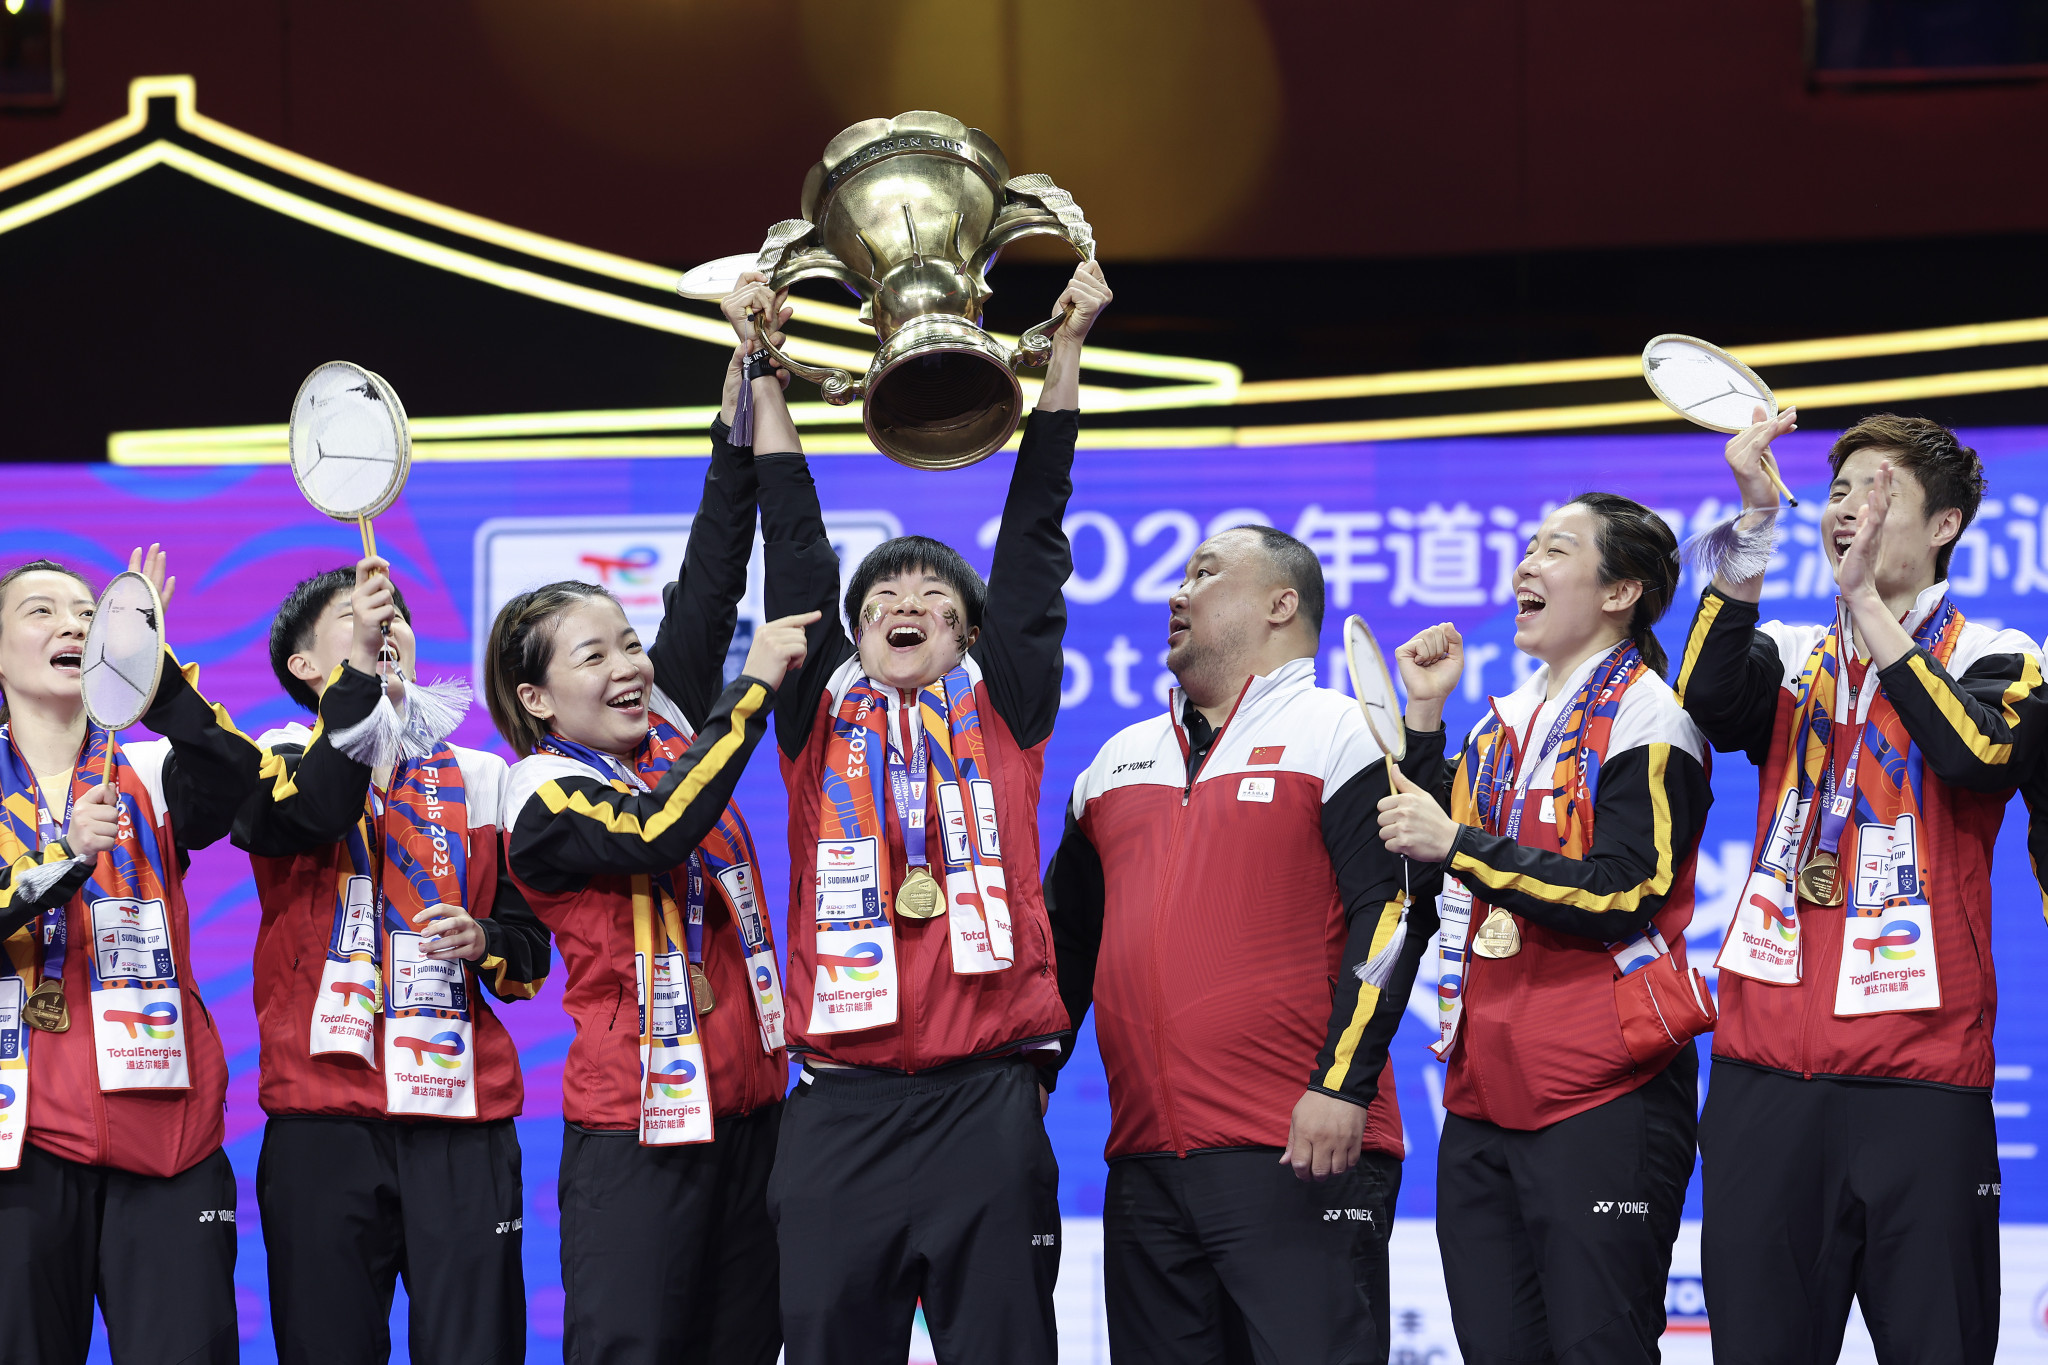 China lifted their third consecutive Sudirman Cup in Surzhou ©Getty Images